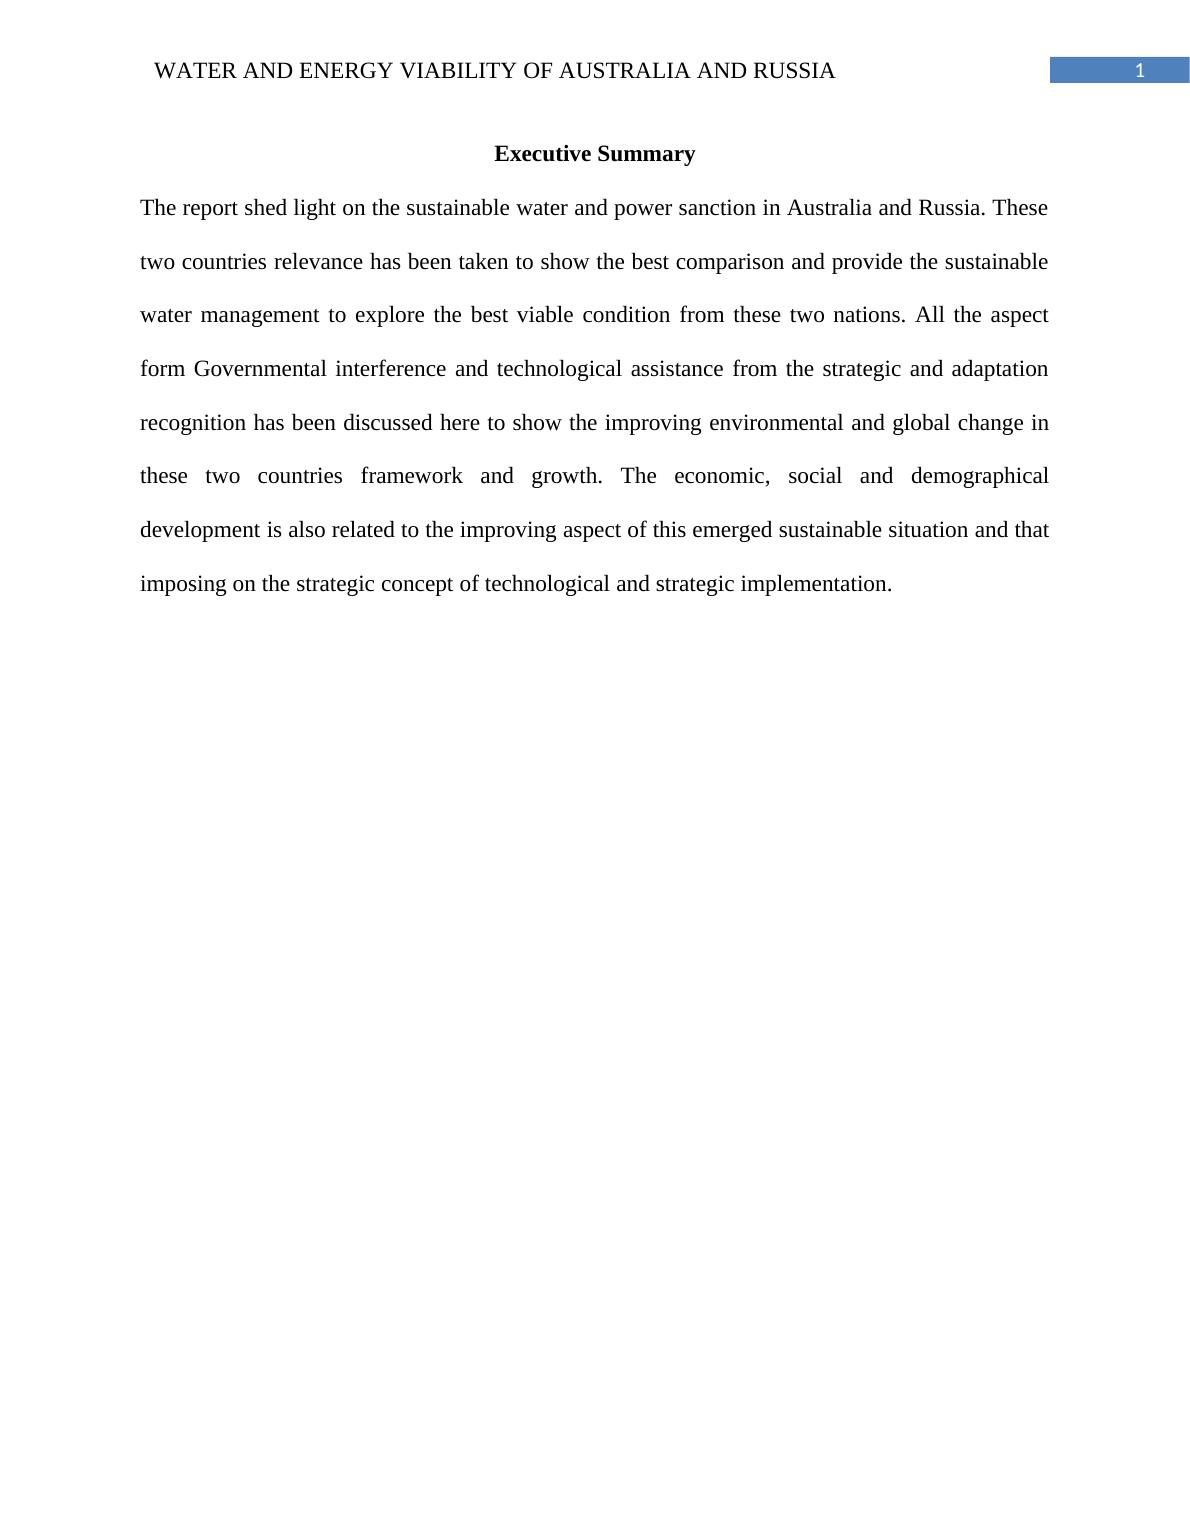 Sustainable Water Management - PDF_2